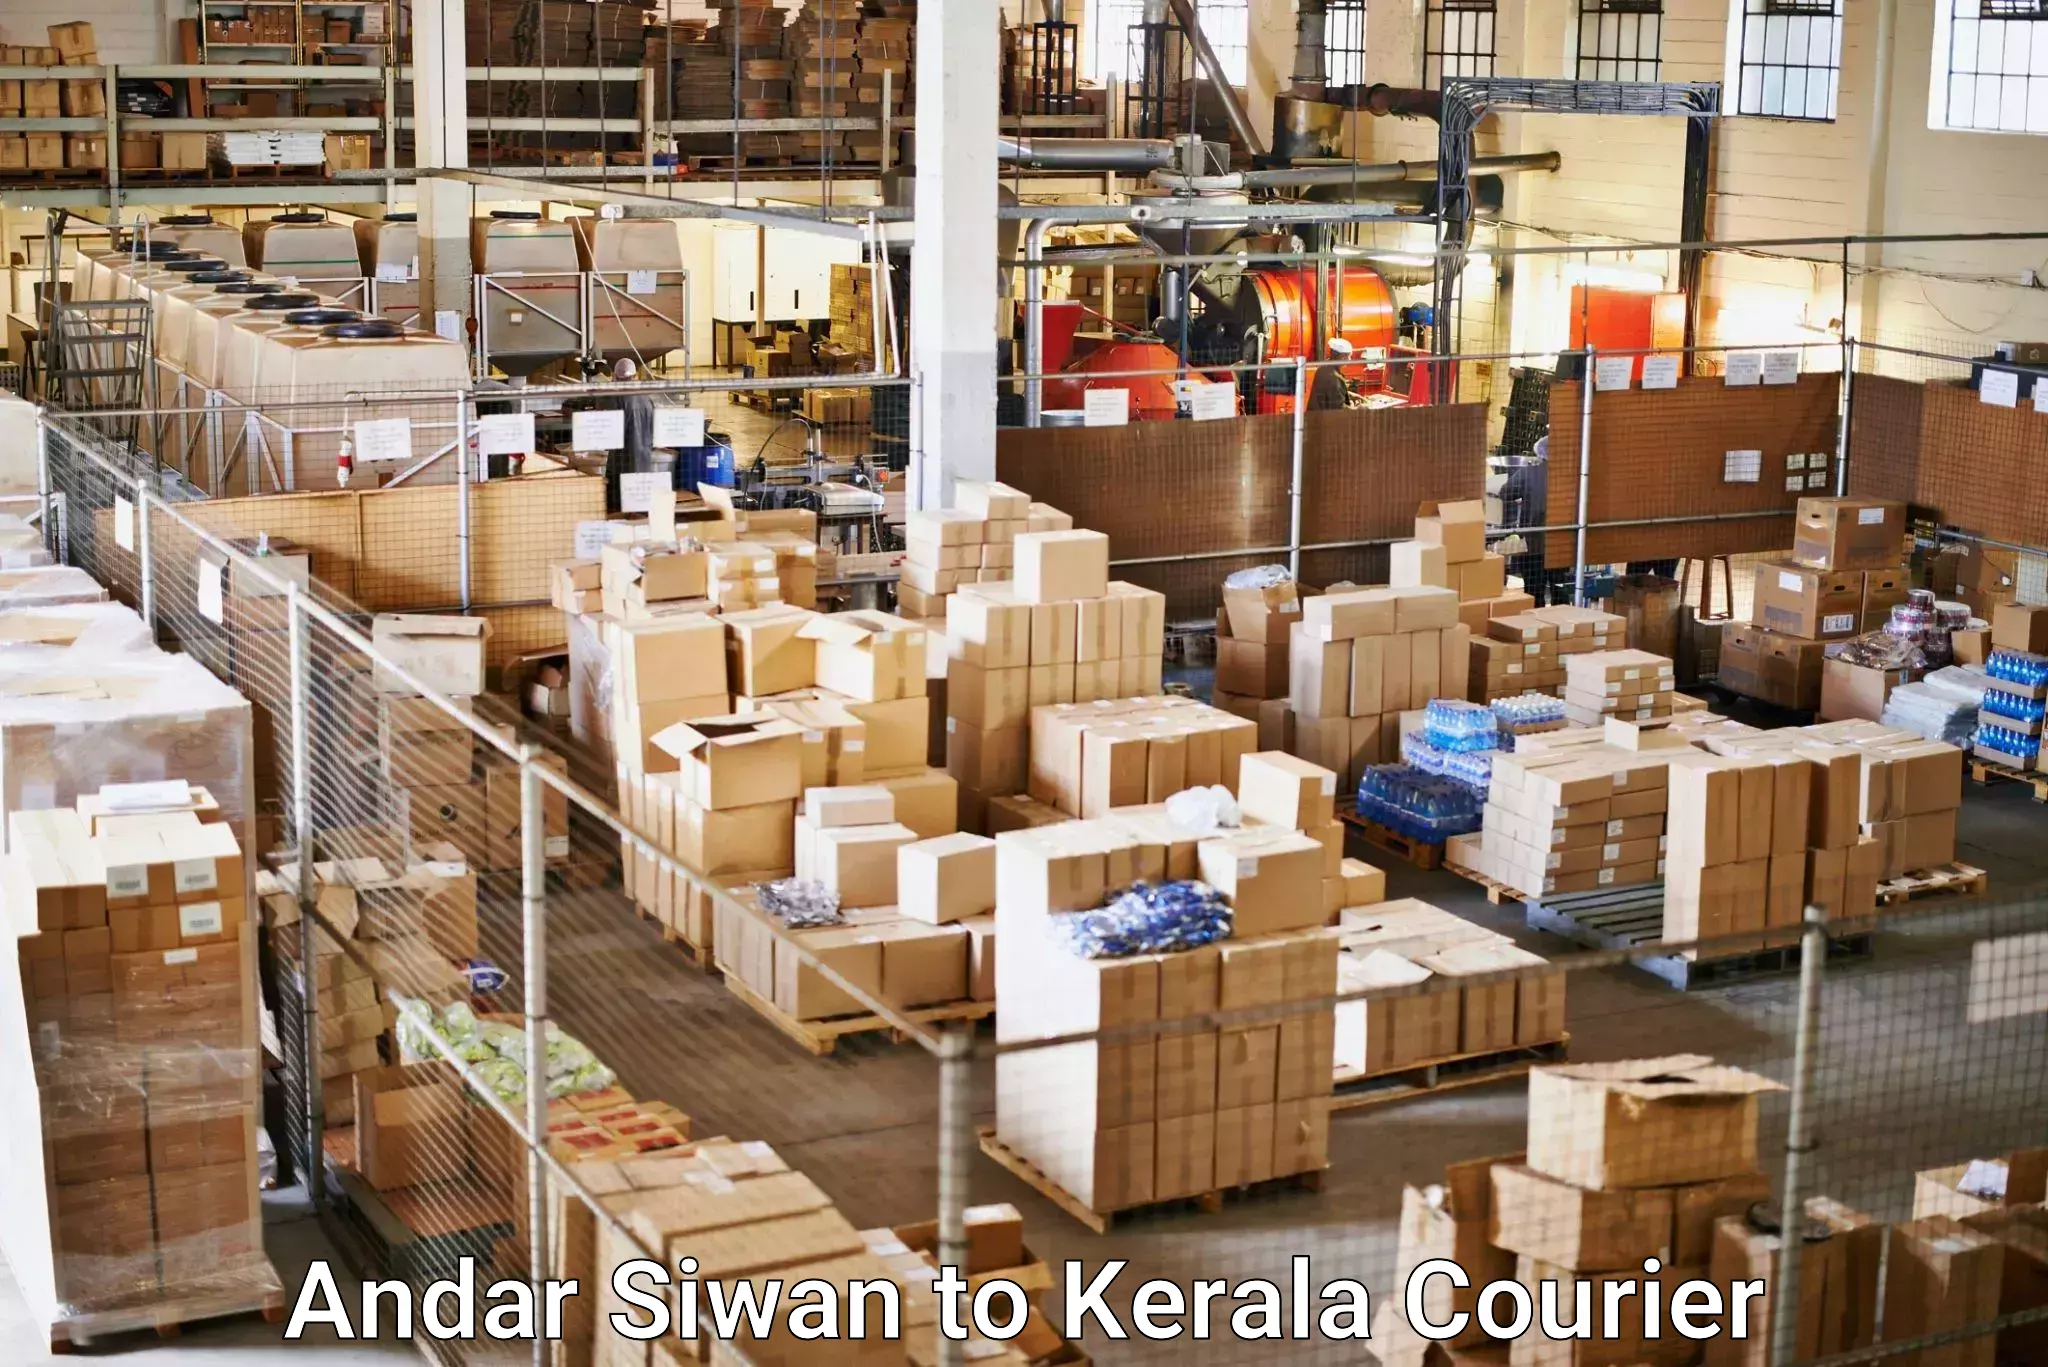 Global freight services Andar Siwan to Cochin Port Kochi